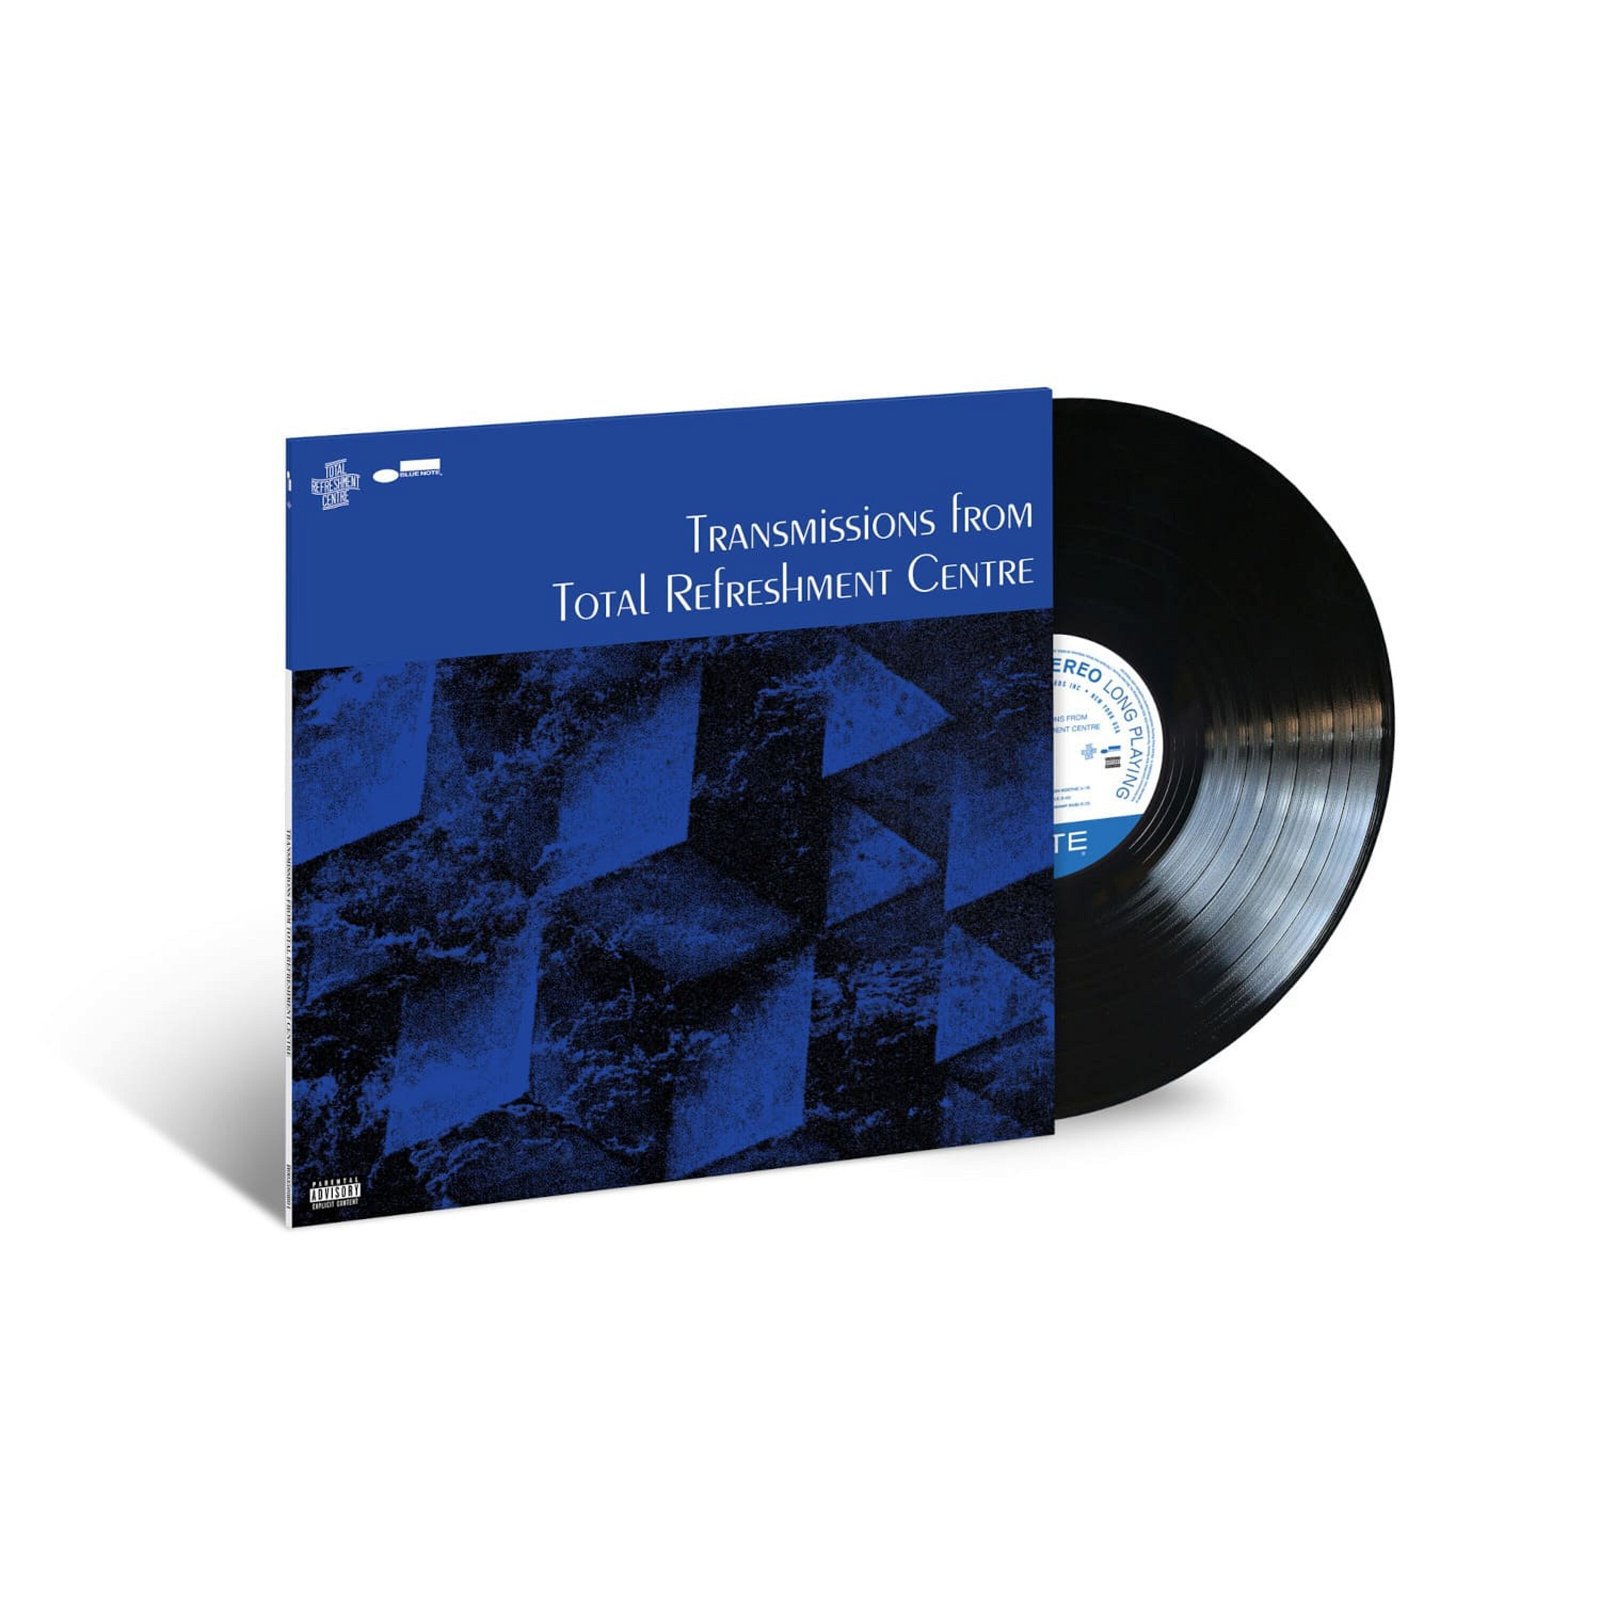 CD Shop - V/A TRANSMISSIONS FROM TOTAL REFRESHMENT CENTRE